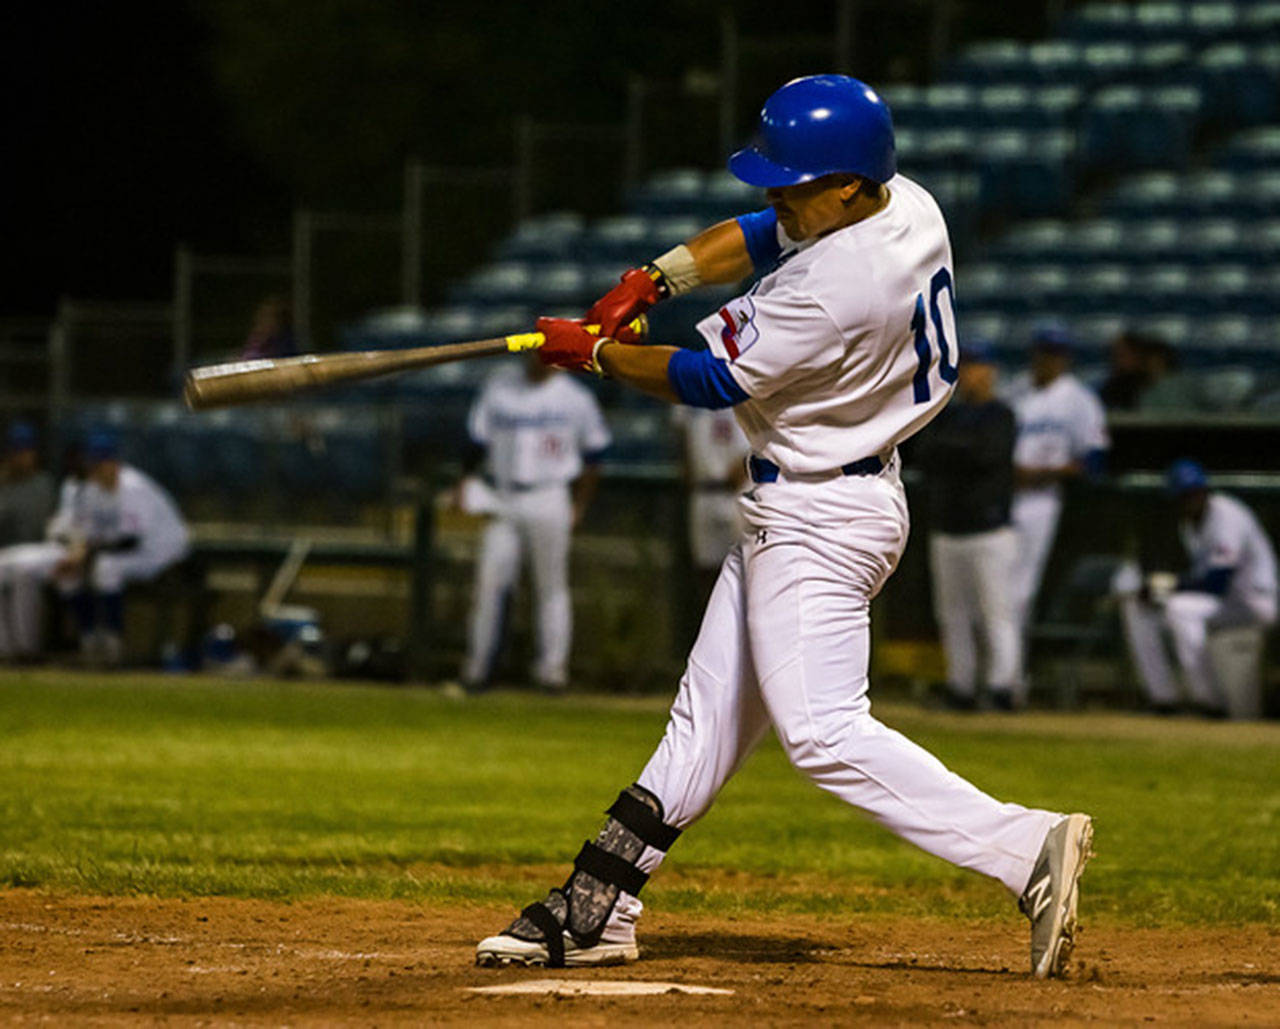 Jay Stout rips a hit for the Train Robbers. (Photo by Jennifer Johnson)